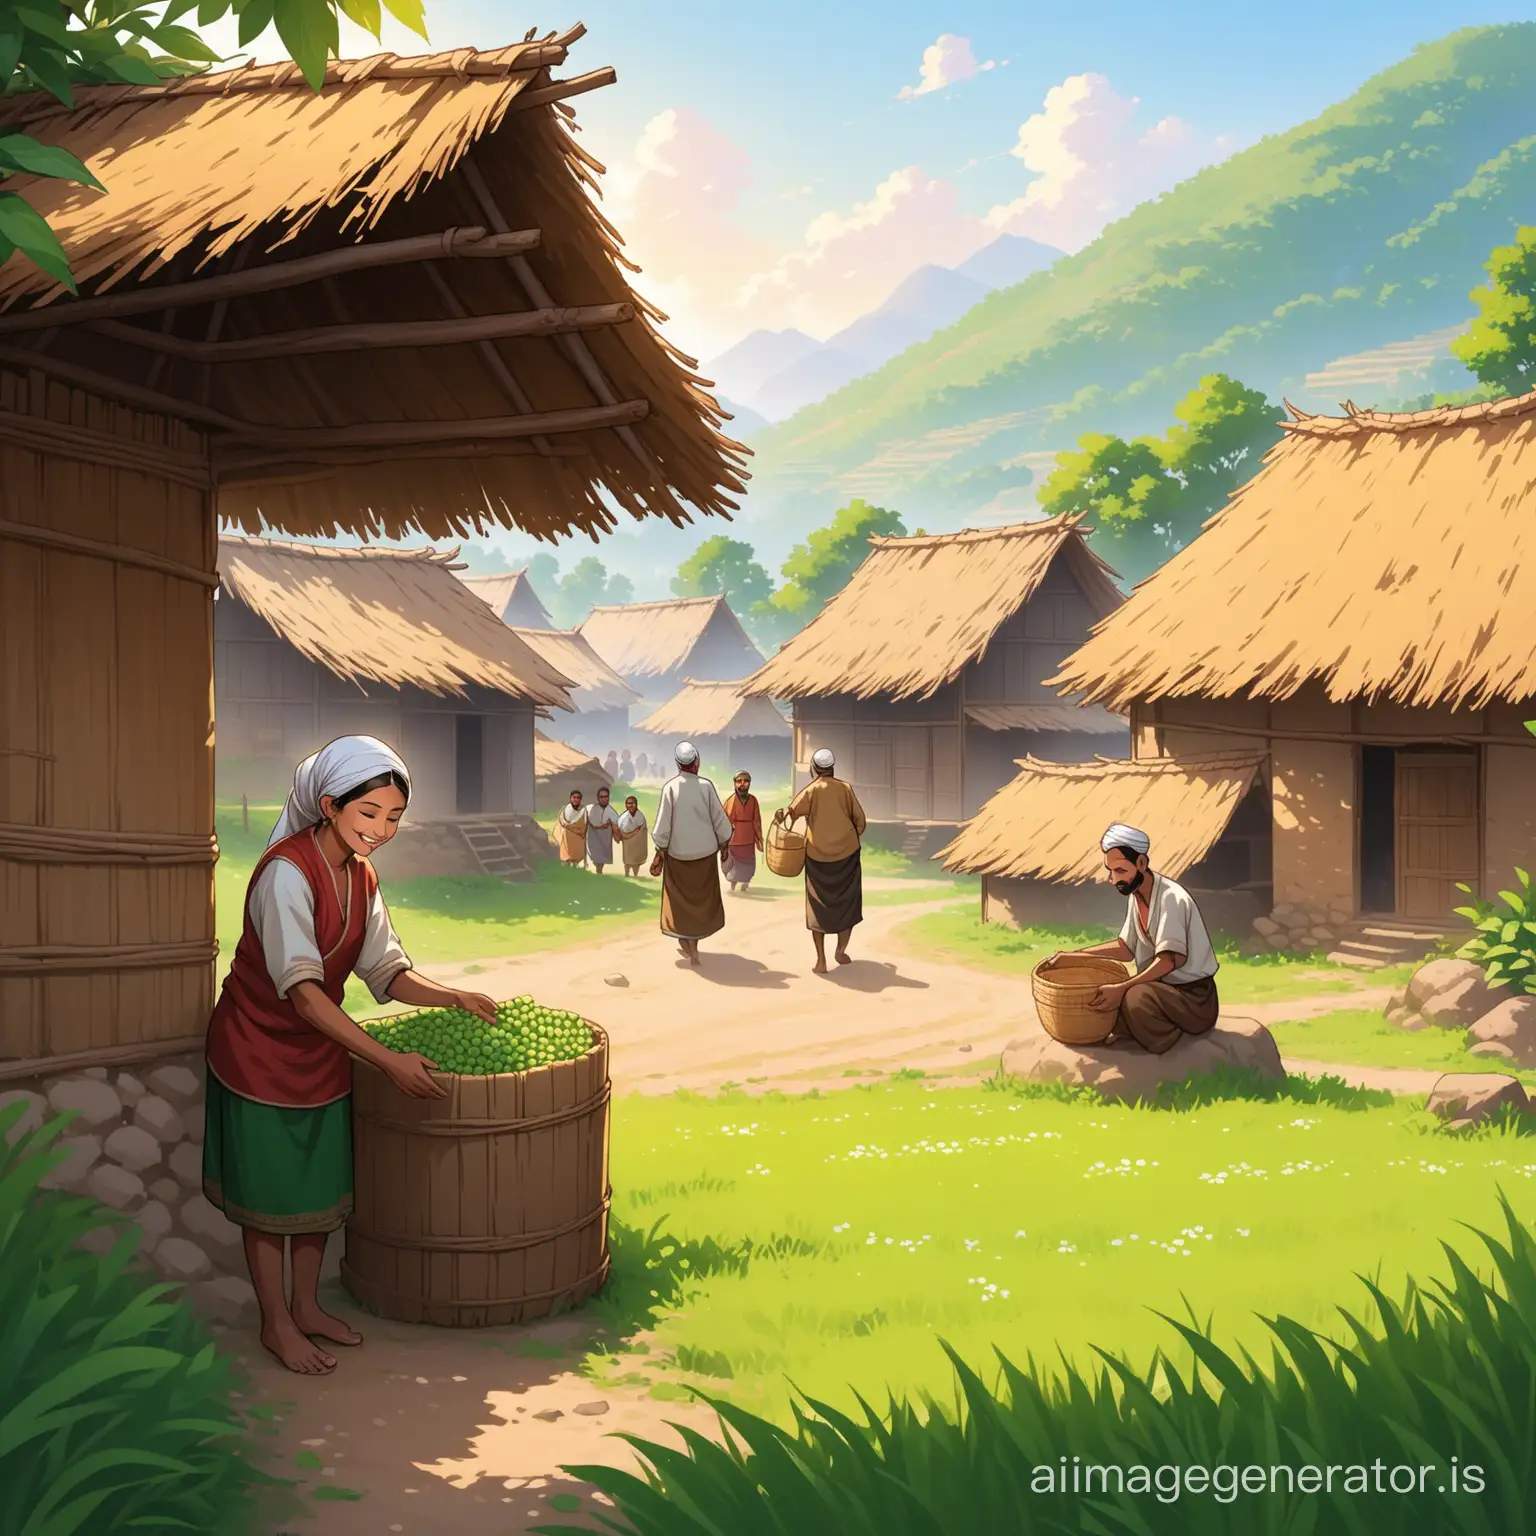 Discovering-Village-Spirit-Merchants-Connection-with-Nature-and-Kindness